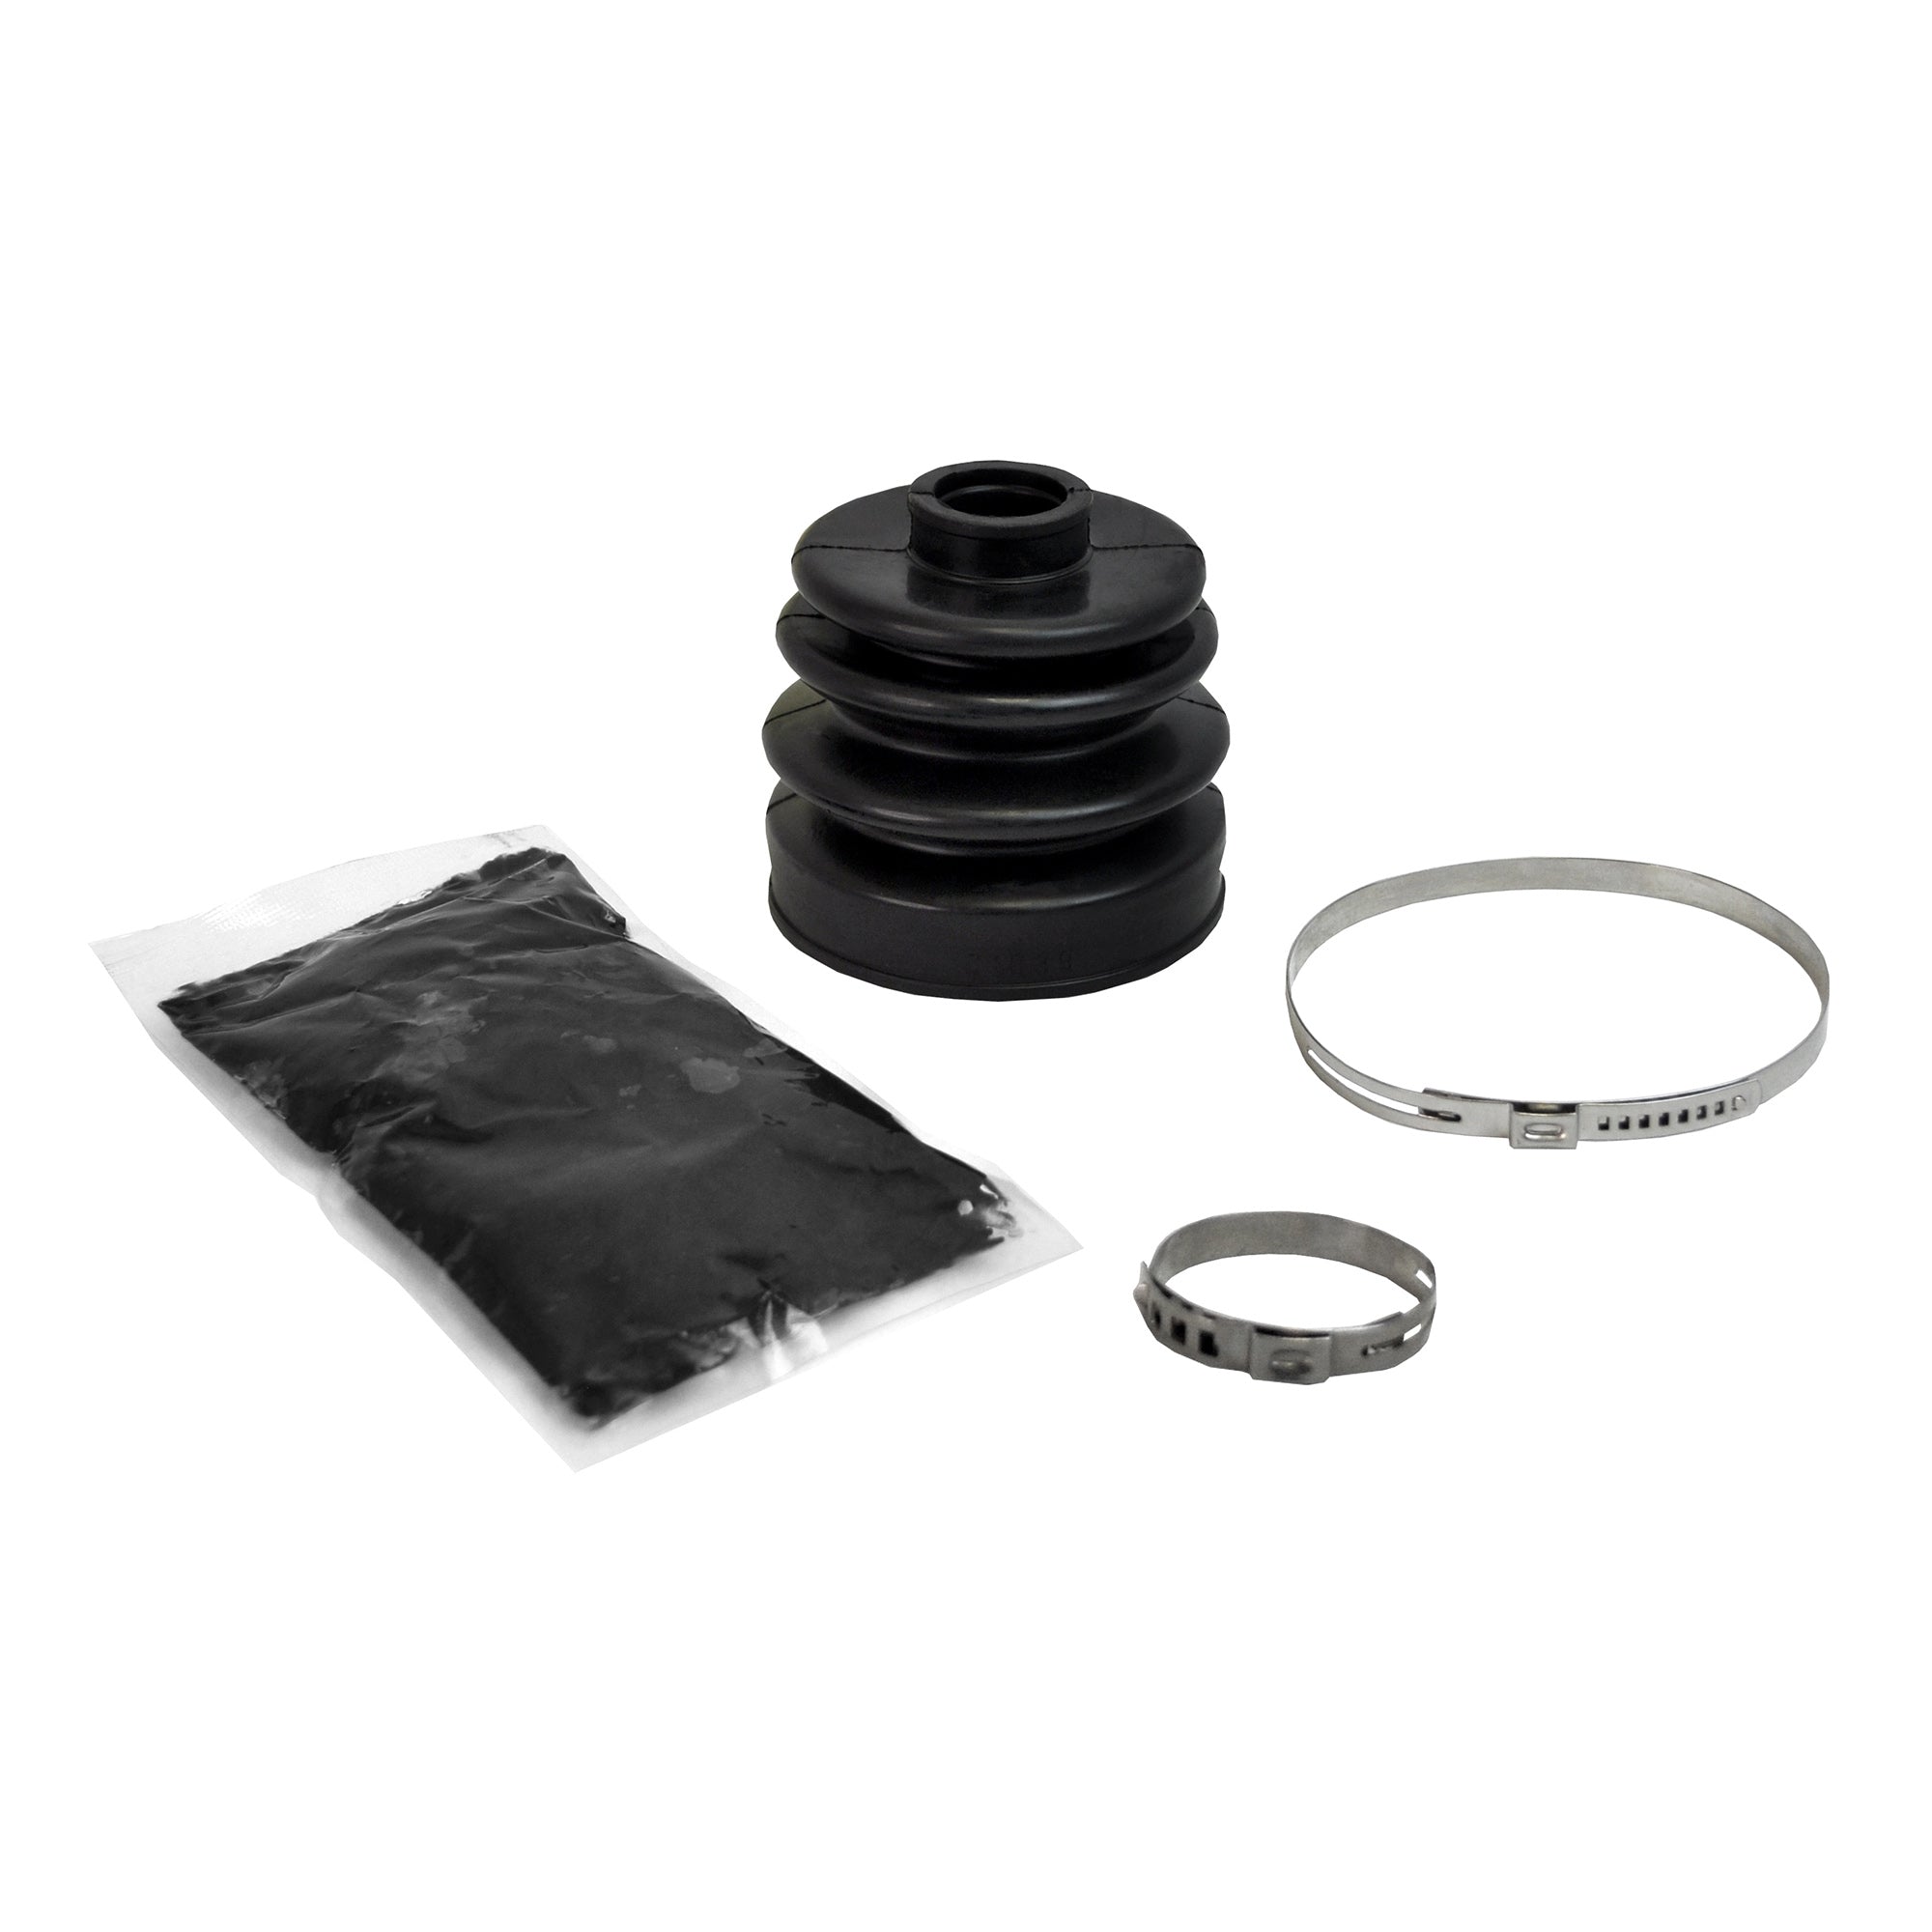 Polaris ACE 570 Rugged OE Replacement Boot Kit